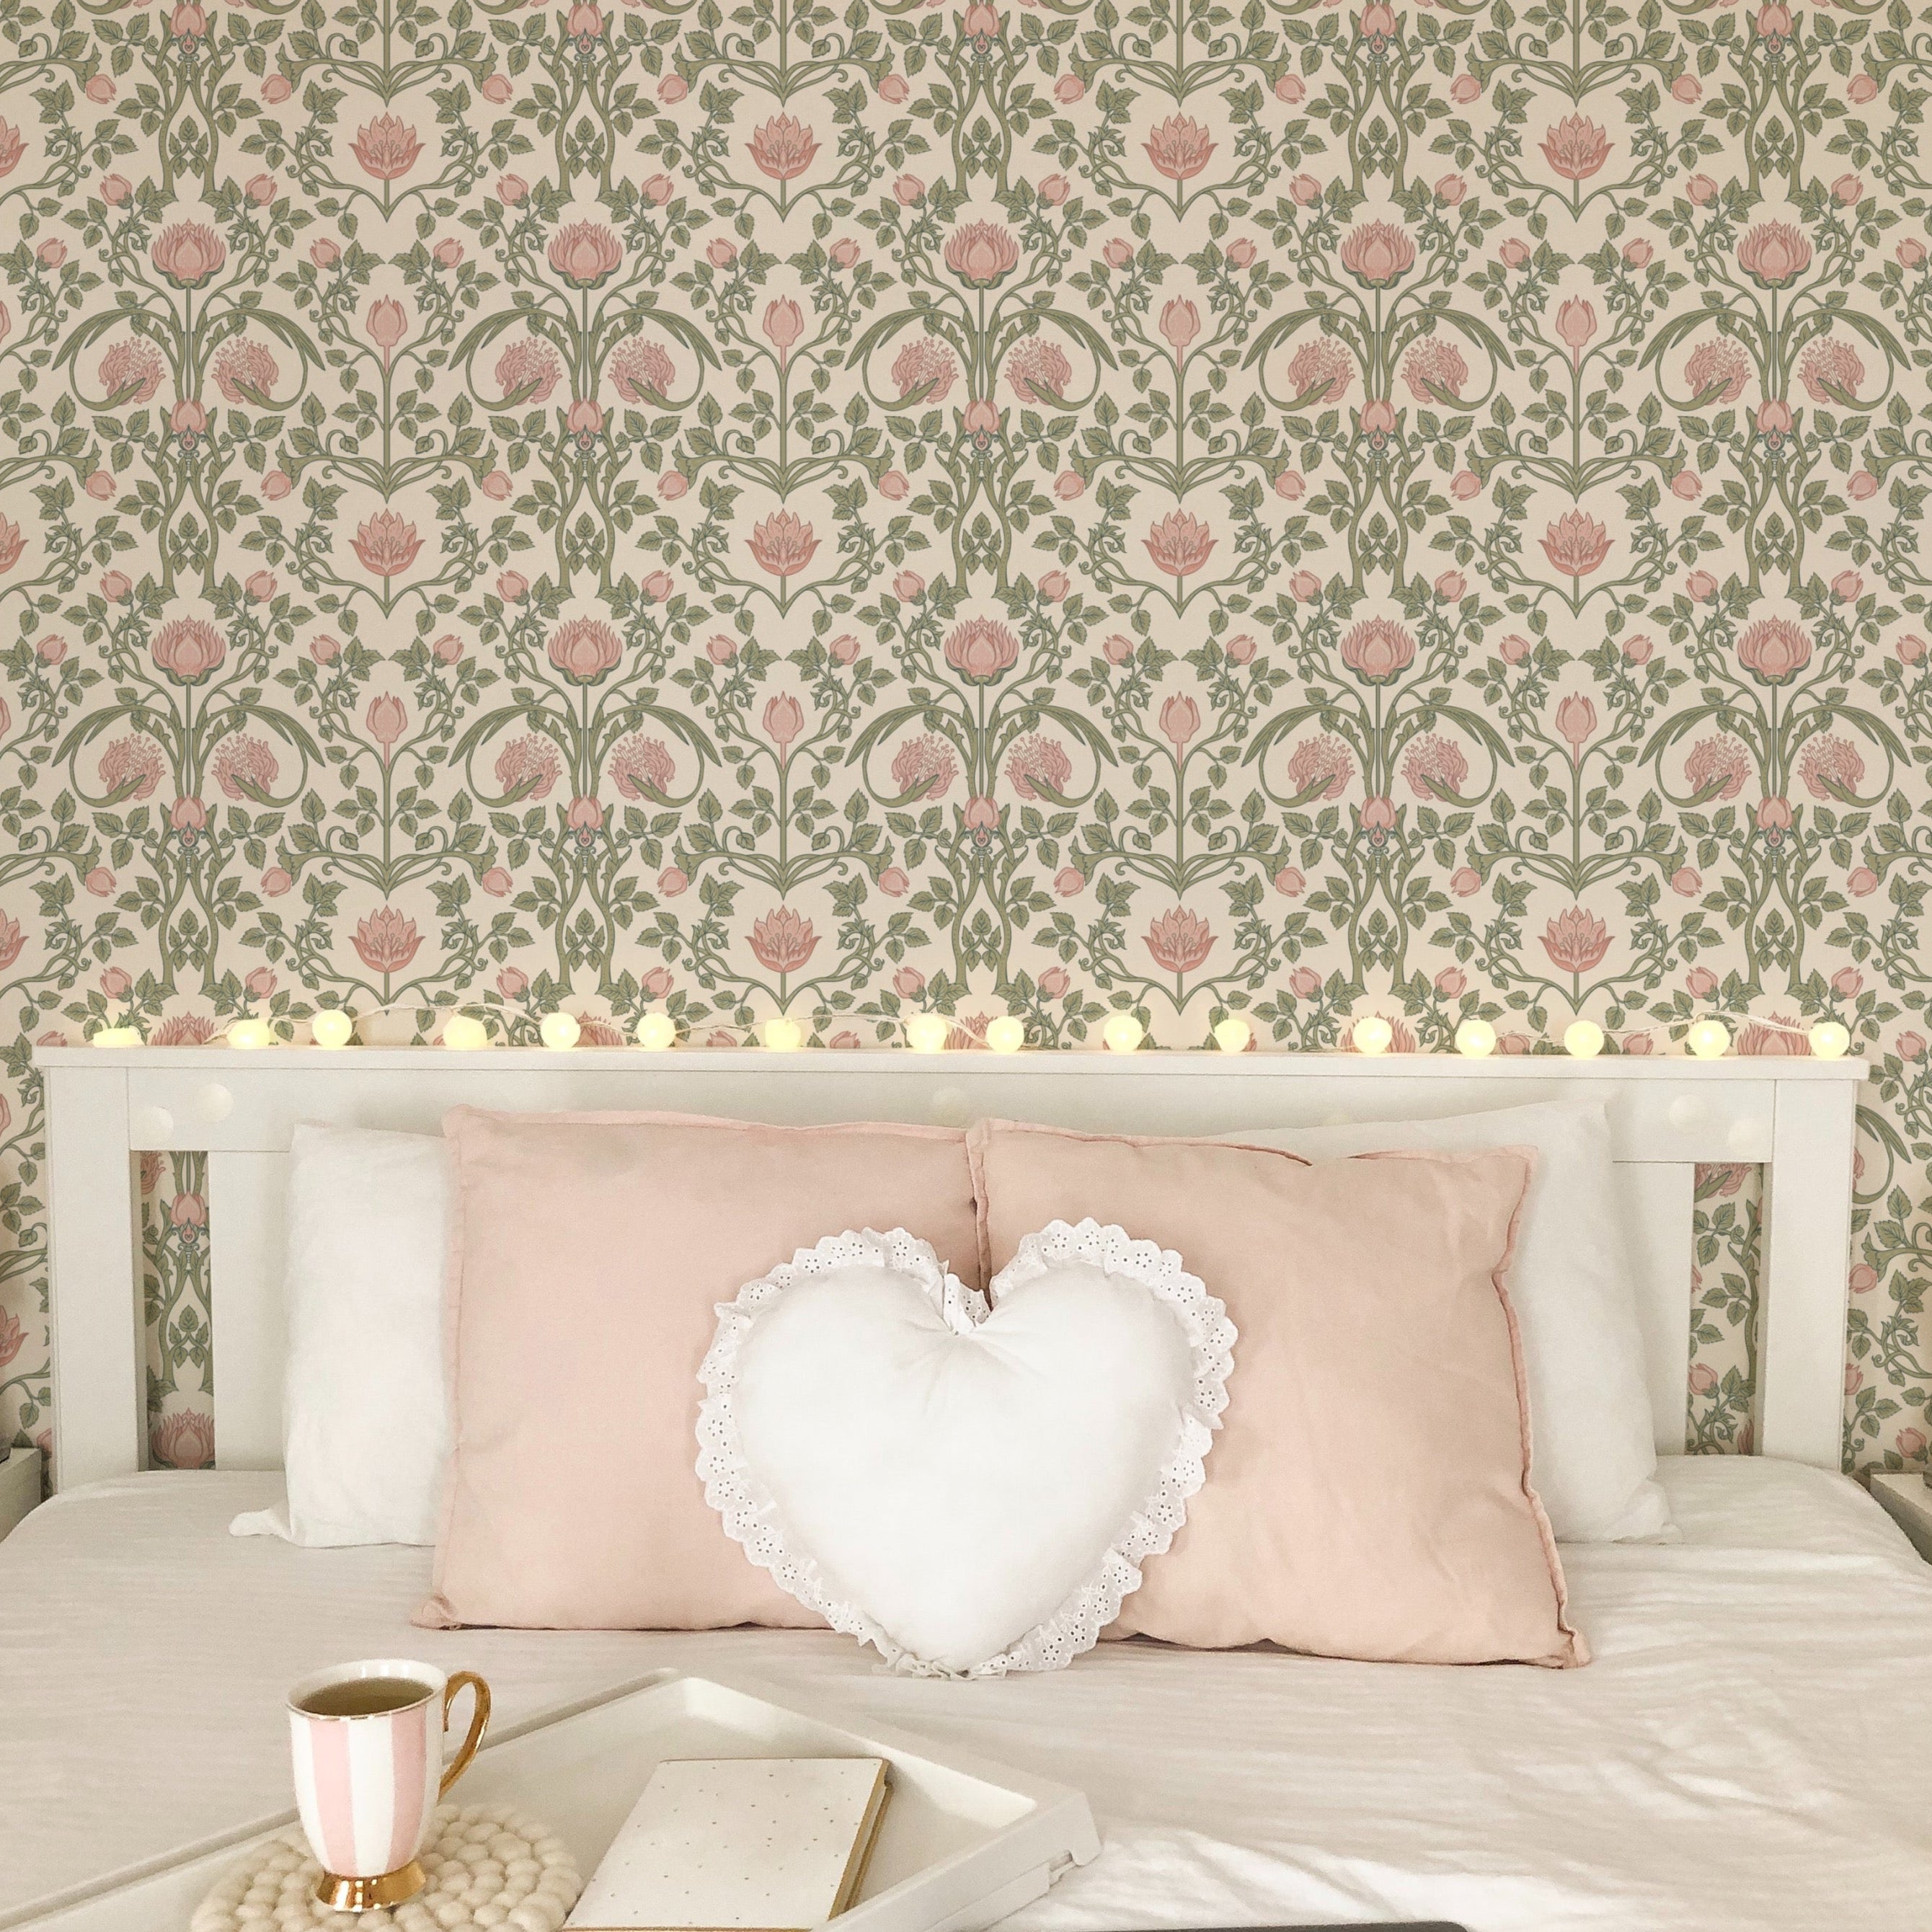 A serene bedroom setting with a white bed adorned with soft pink pillows, a heart-shaped cushion, and a serving tray, complemented by the pastel floral damask wallpaper in the background